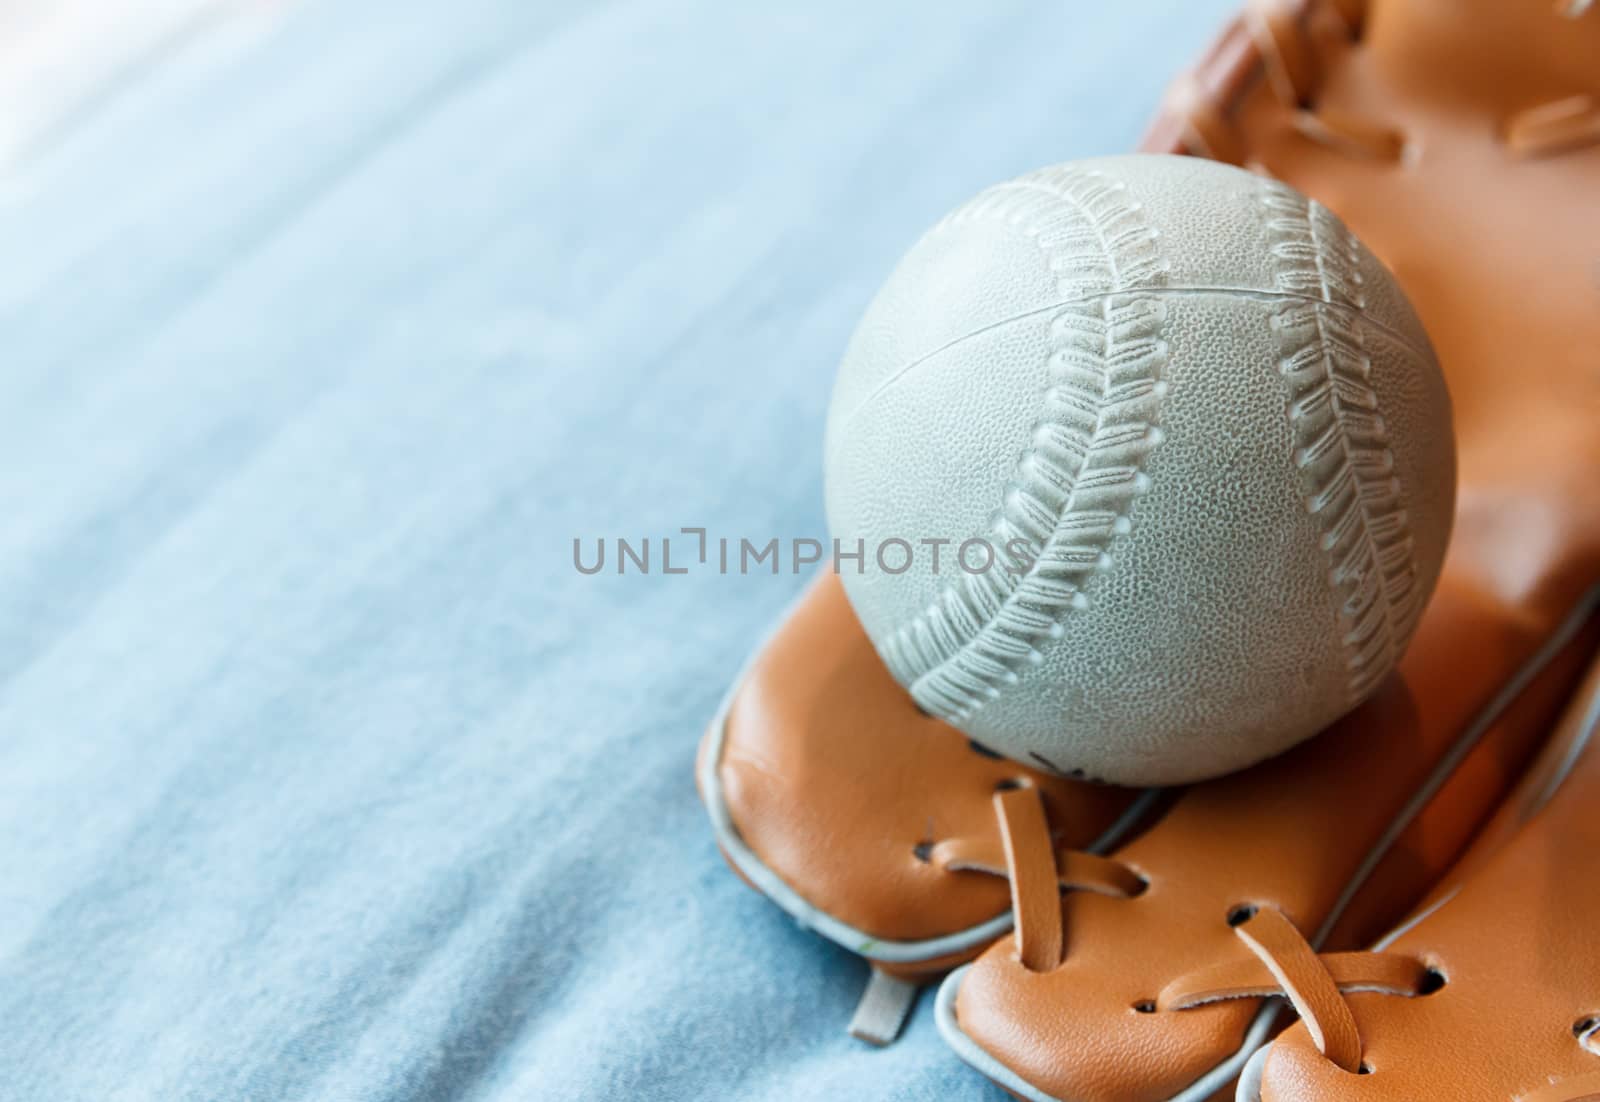 Old baseball in a glove on blue bed